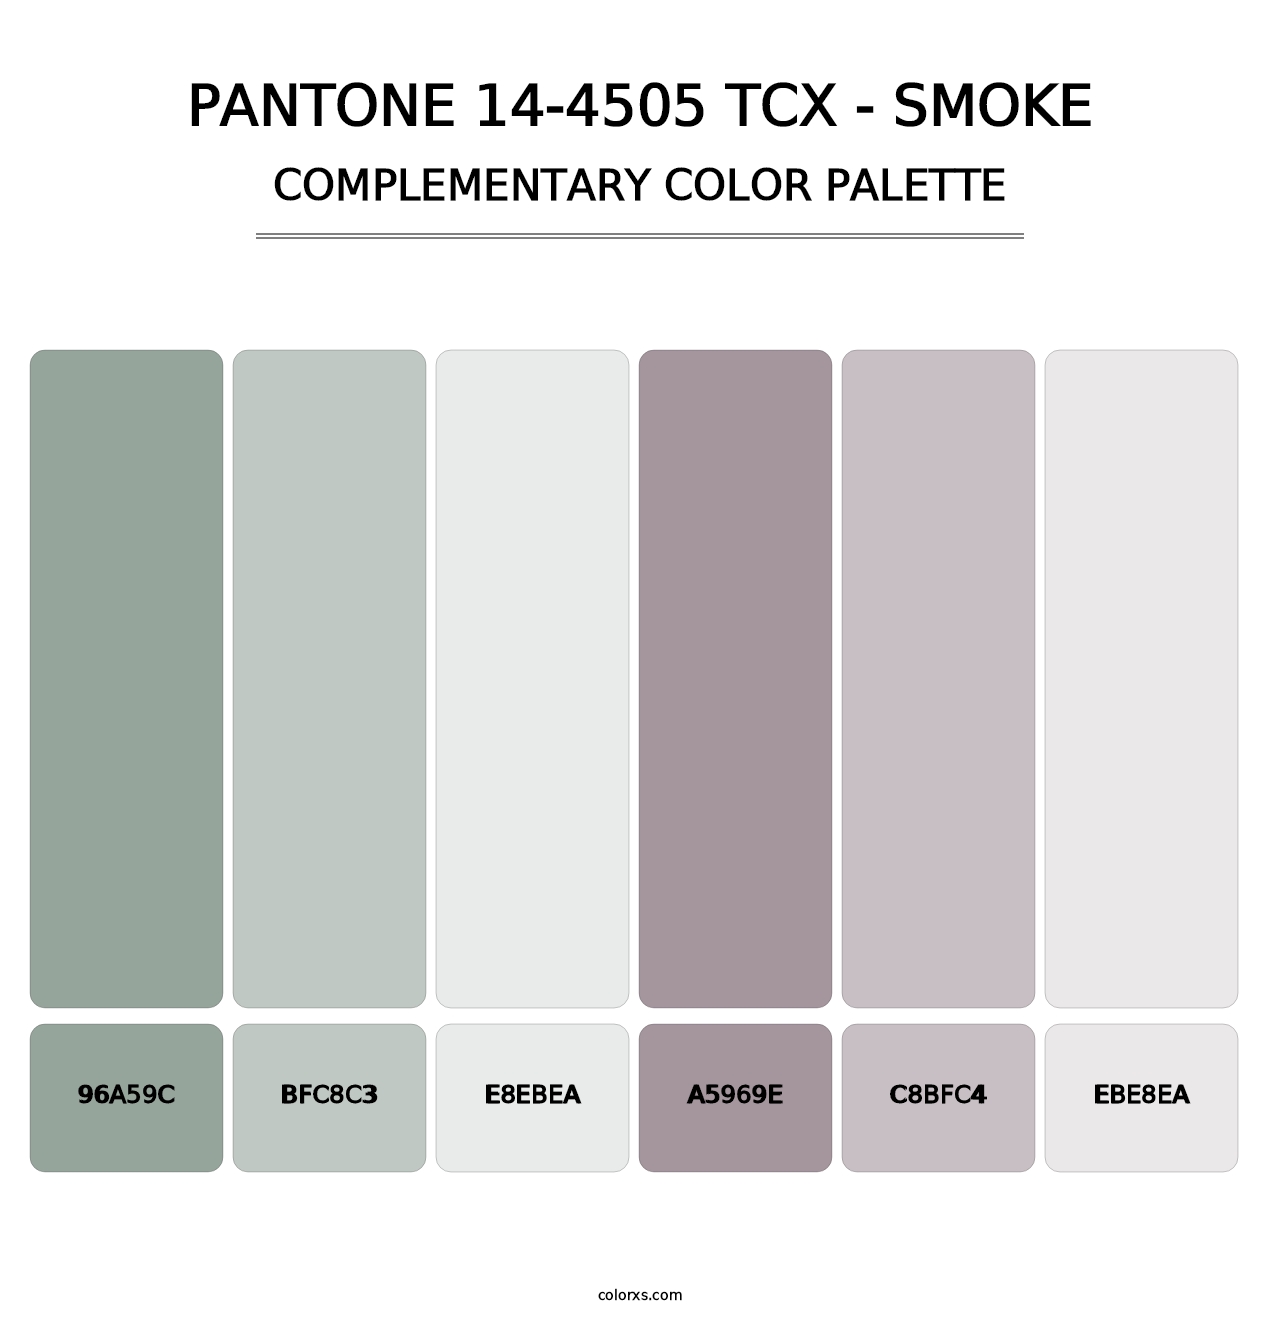 PANTONE 14-4505 TCX - Smoke - Complementary Color Palette